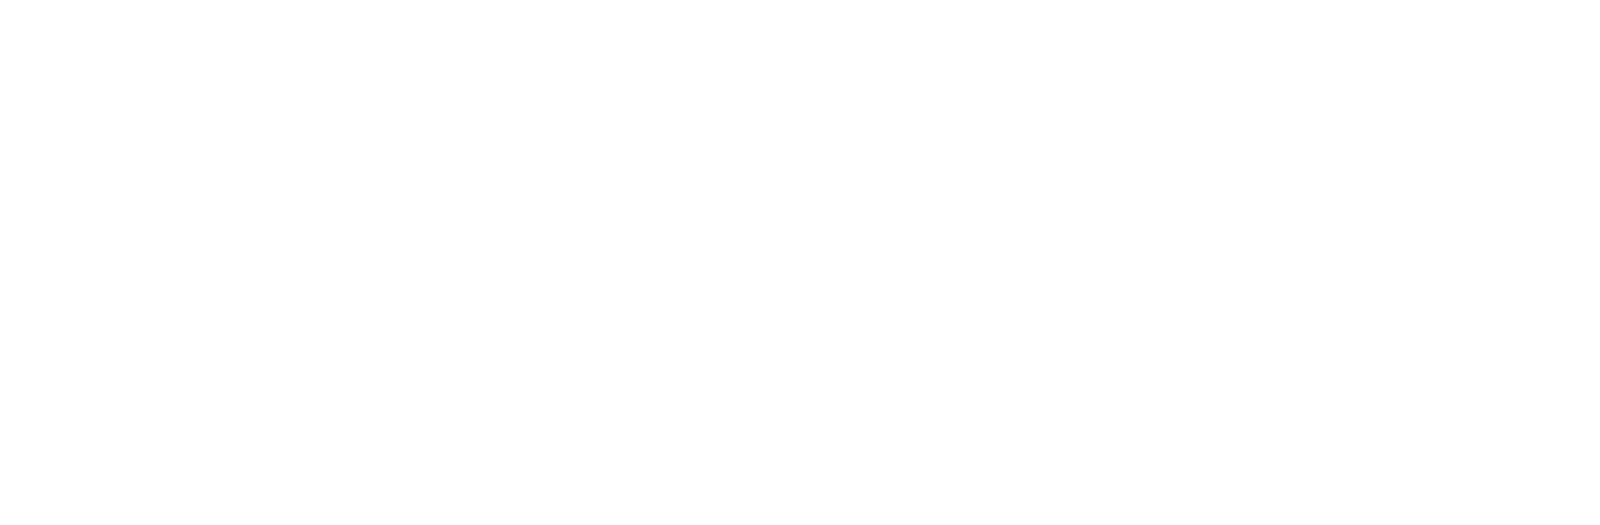 48th Annual Conference on Explosives and Blasting Technique: Jan. 30 - Feb. 2, 2022; Las Vegas, Nev.